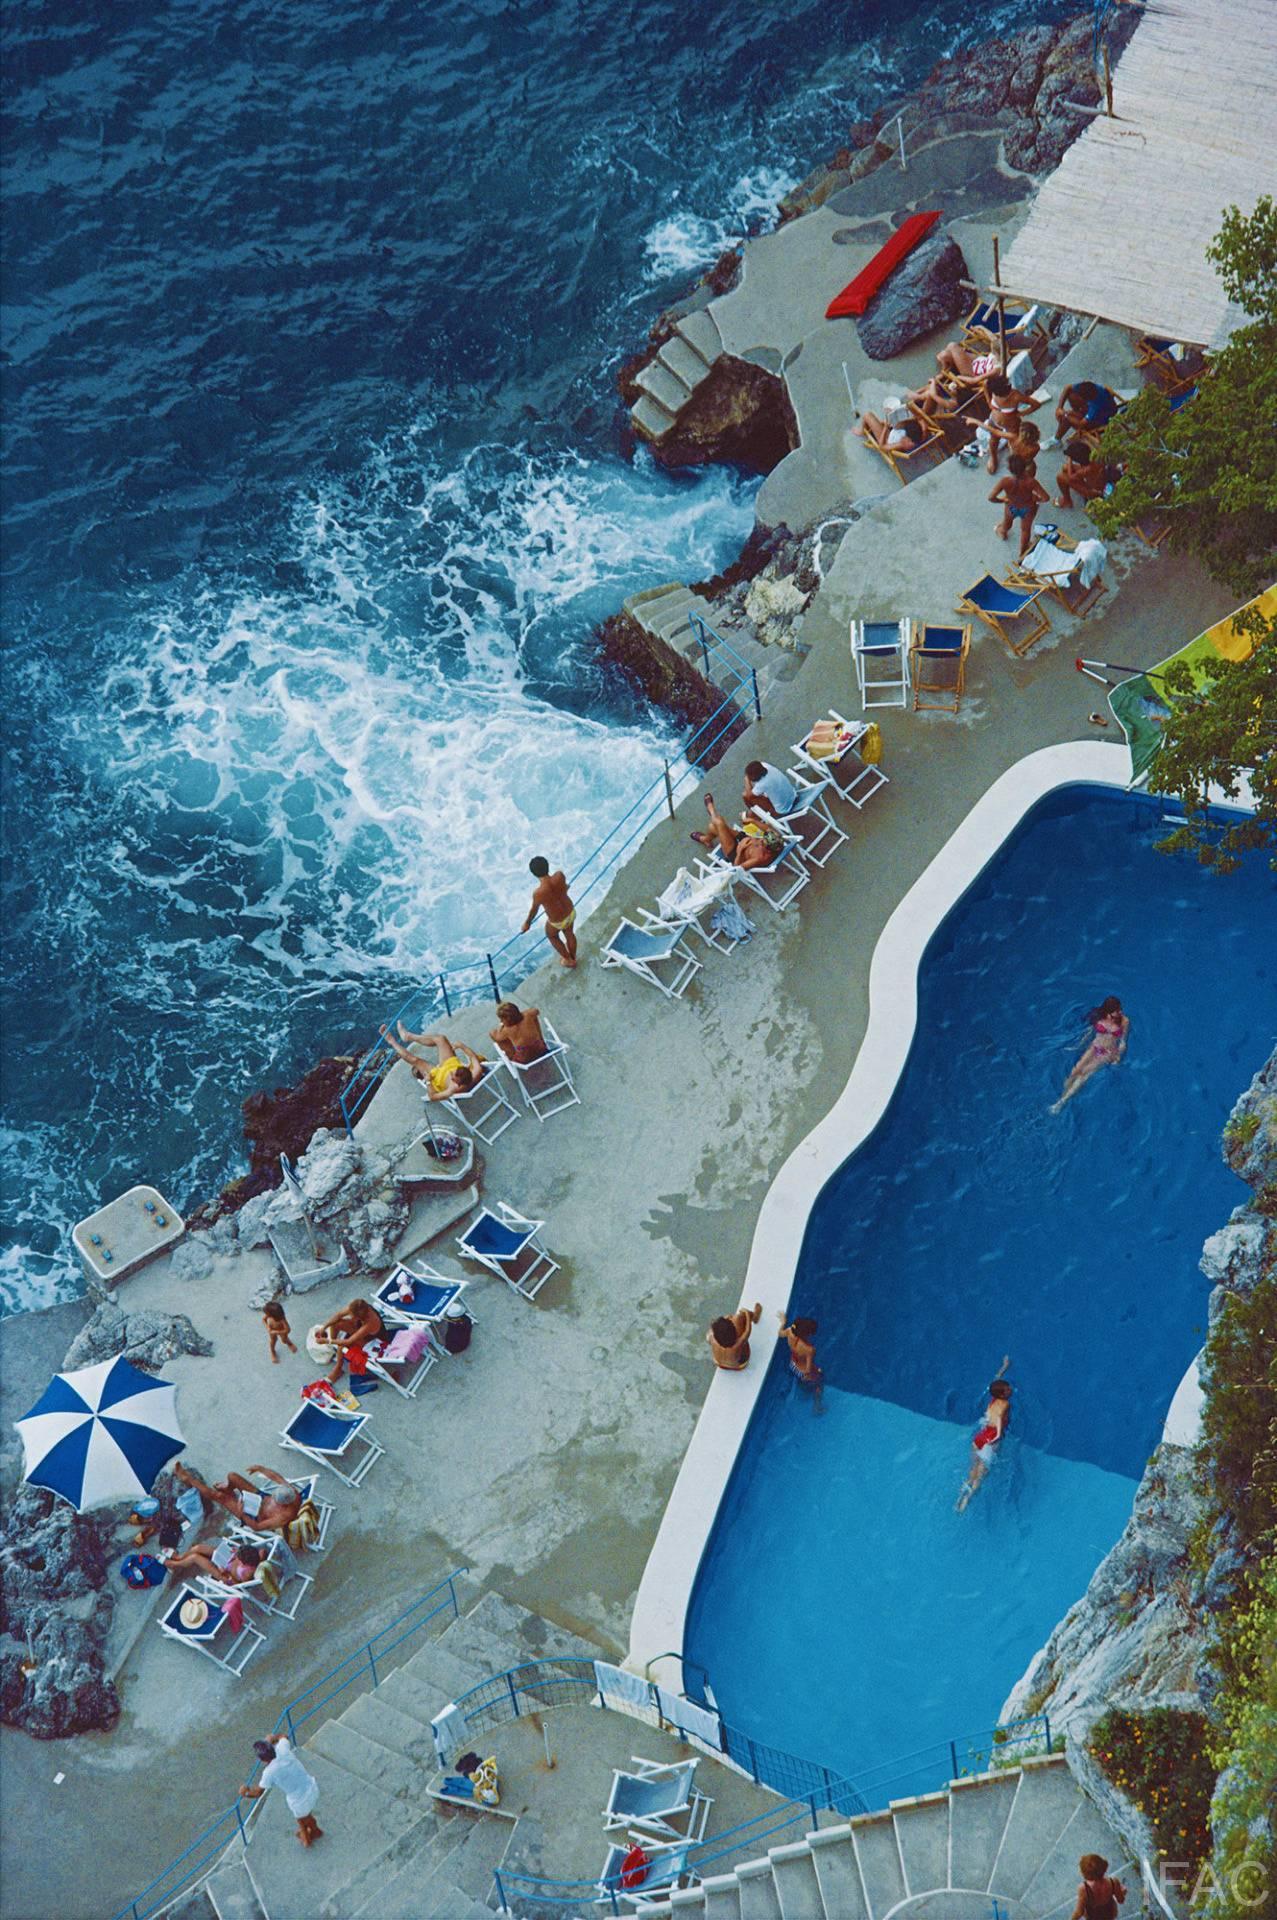 Slim Aarons
Pool On Amalfi Coast (Slim Aarons Estate Edition), 1984
Chromogenic lambda print
Estate stamped and numbered edition of 150
40 x 30 inches

A view of the seaside pool at the Hotel St. Caterina, Amalfi, Italy, September 1984.

Estate